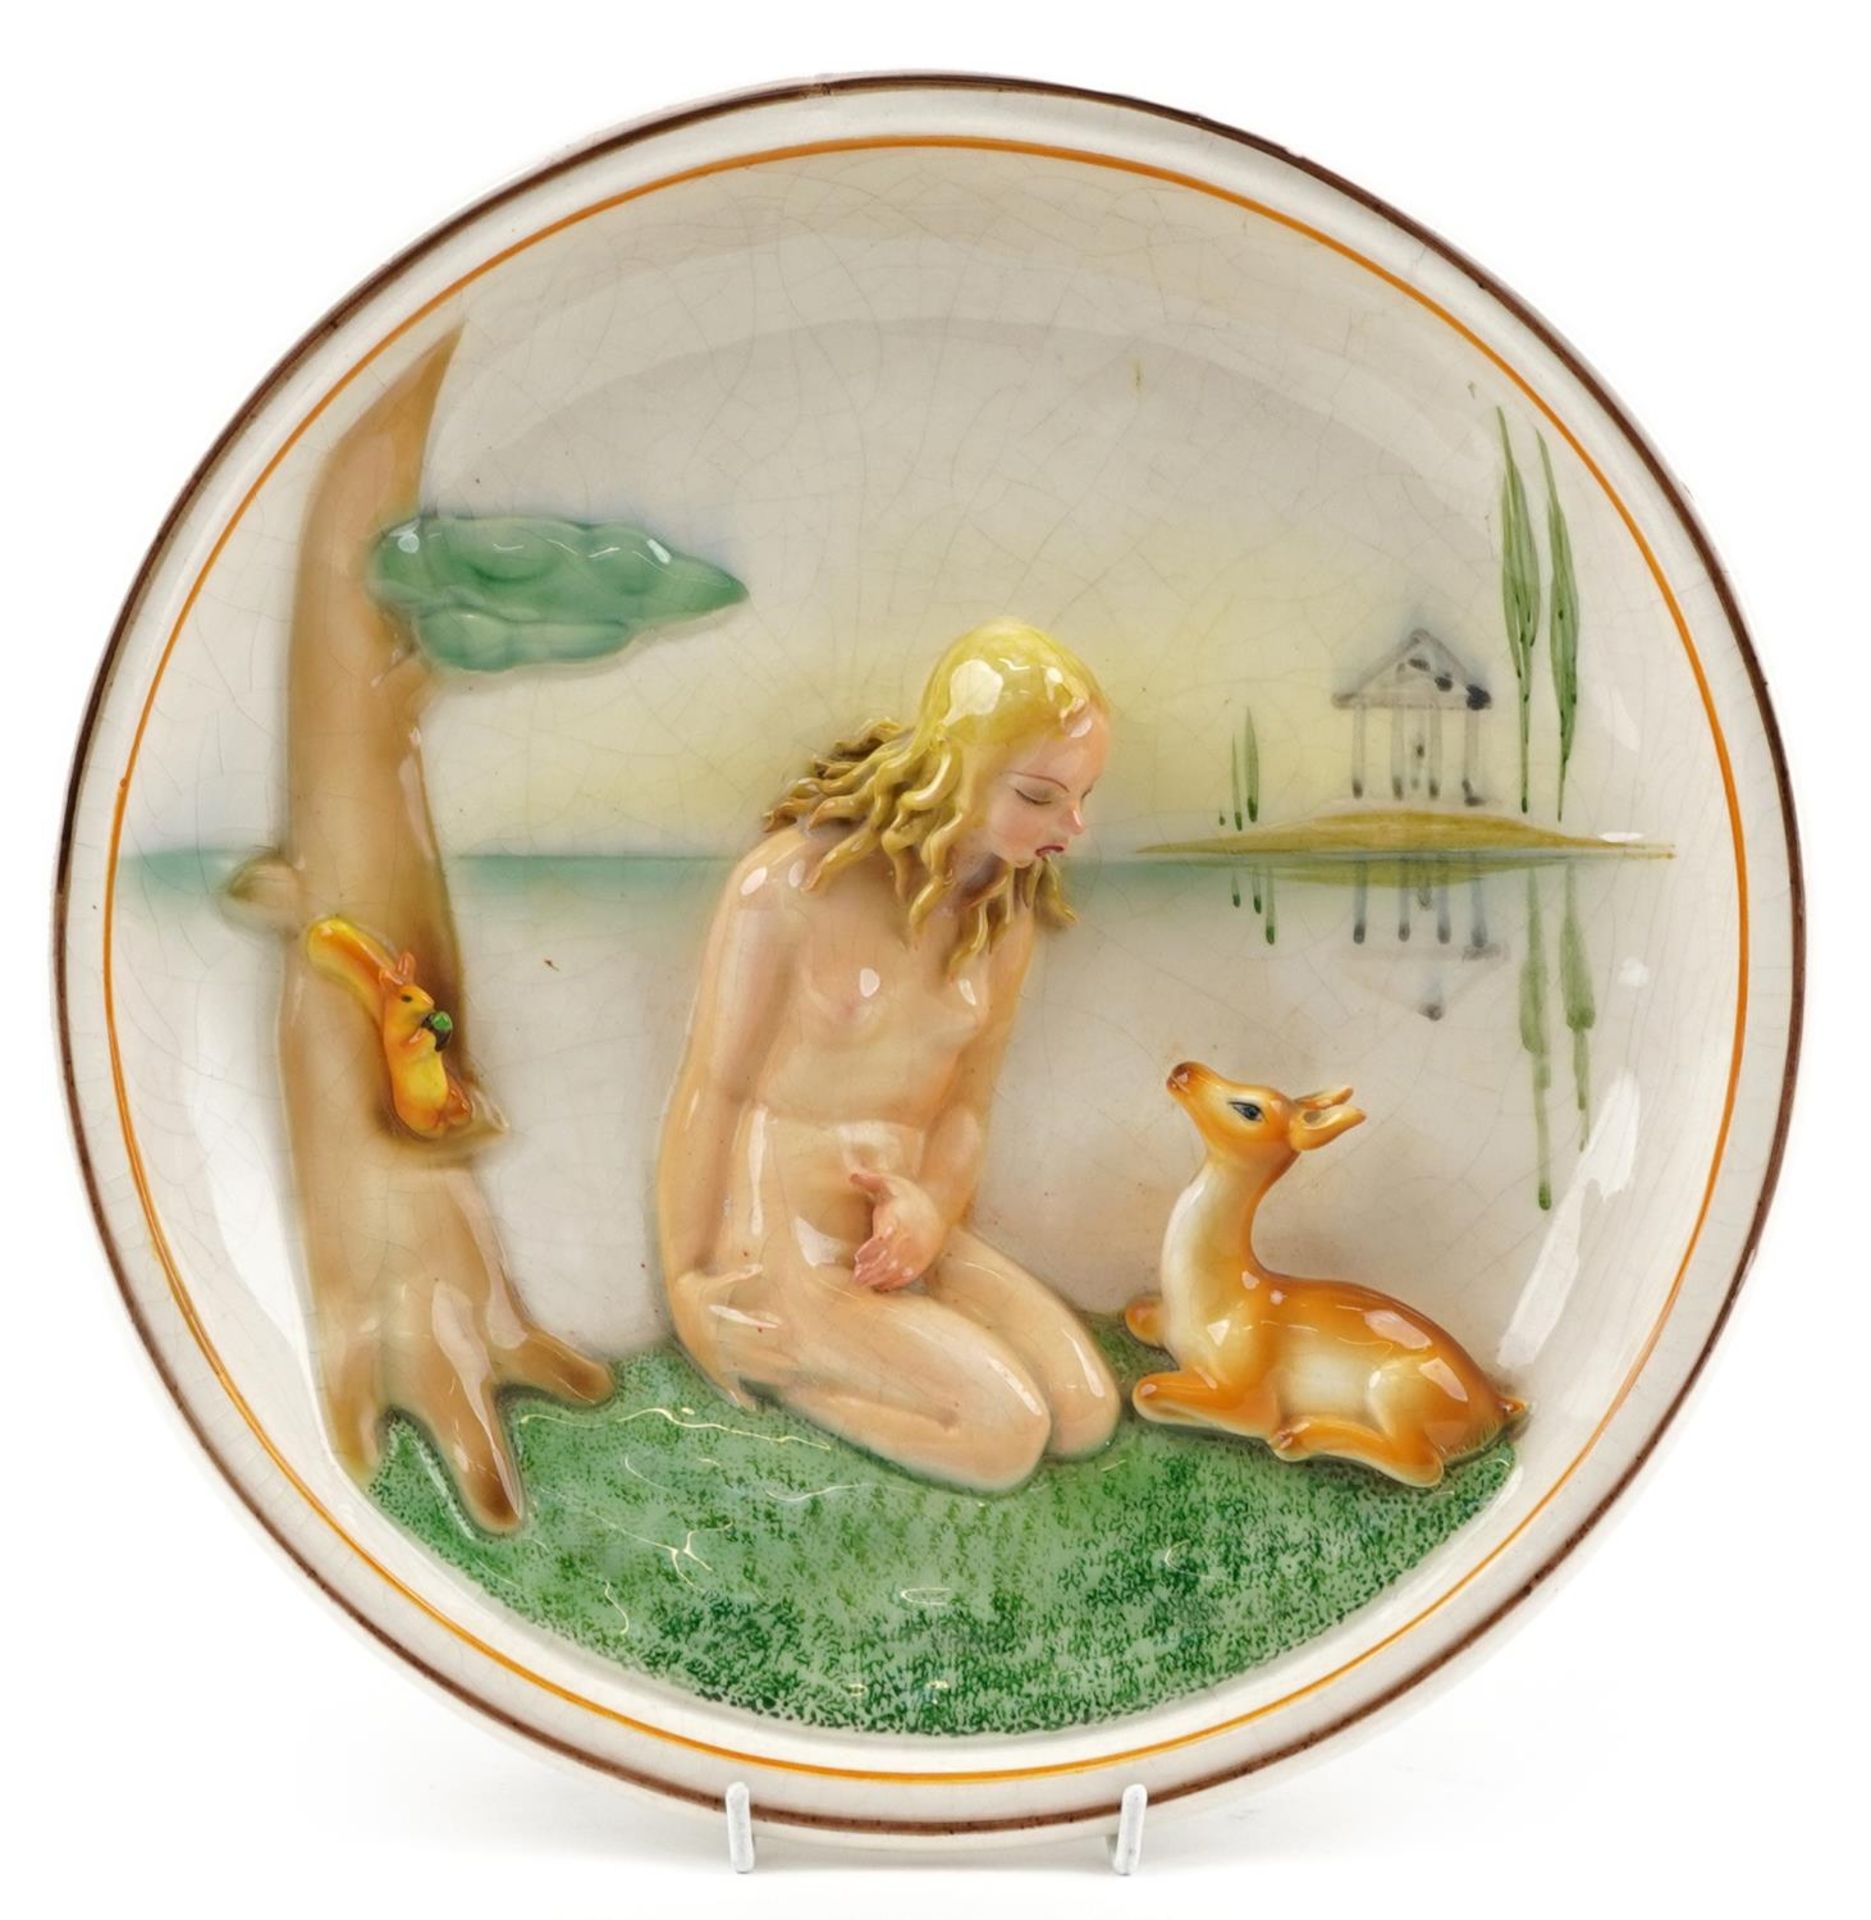 Lenci, Italian Art Deco wall plaque decorated in relief with nude female and foal, paper label and